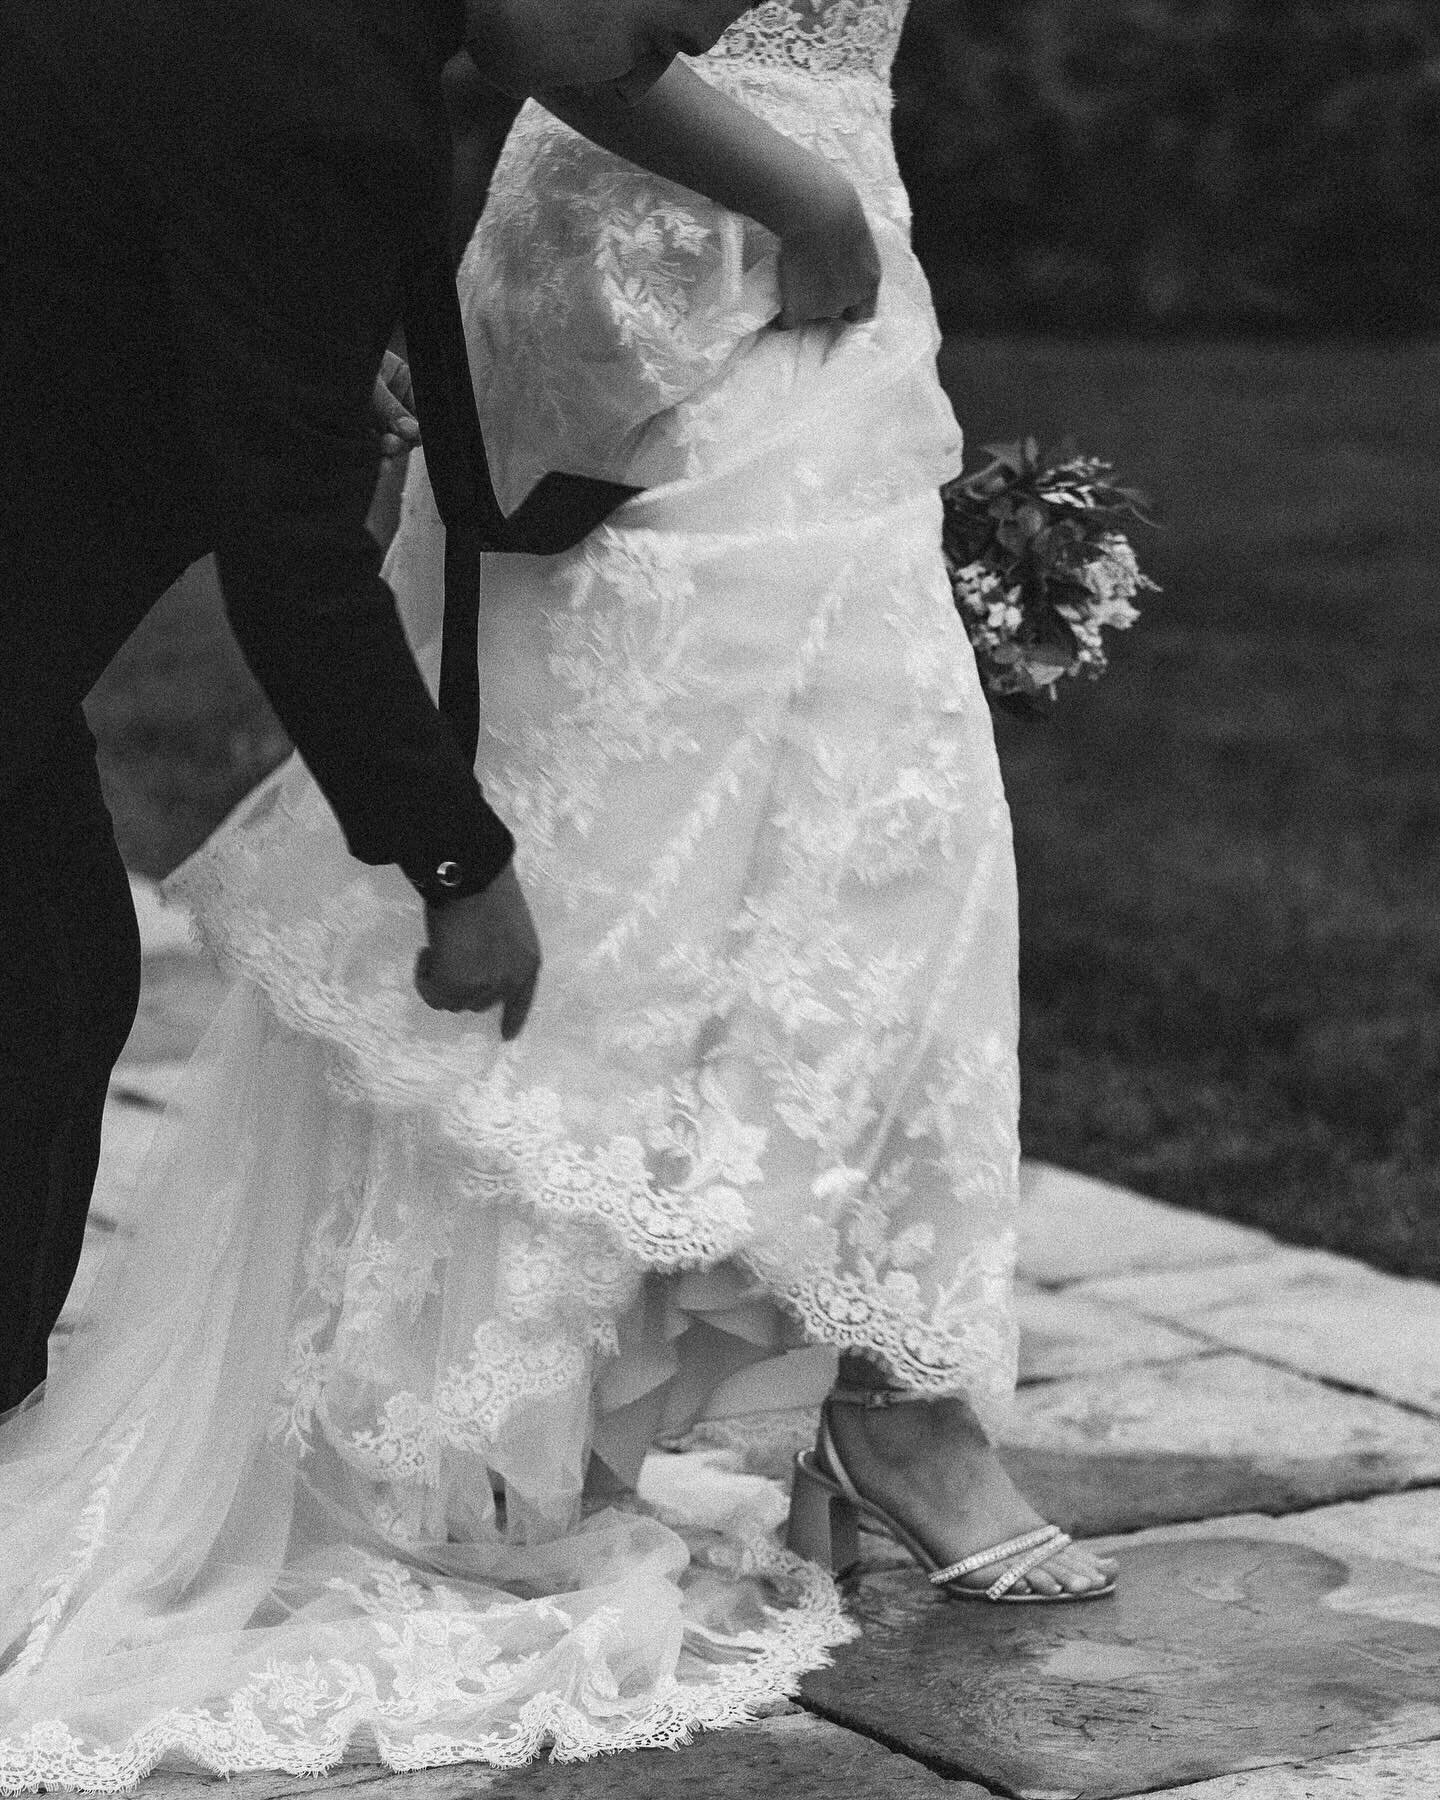 I delivered my first Chicago wedding gallery last week. I can&rsquo;t tell you how special it was to capture a wedding near my hometown and for such a wonderful couple. If you are planning a wedding in the Chicagoland area, let&rsquo;s connect! It is